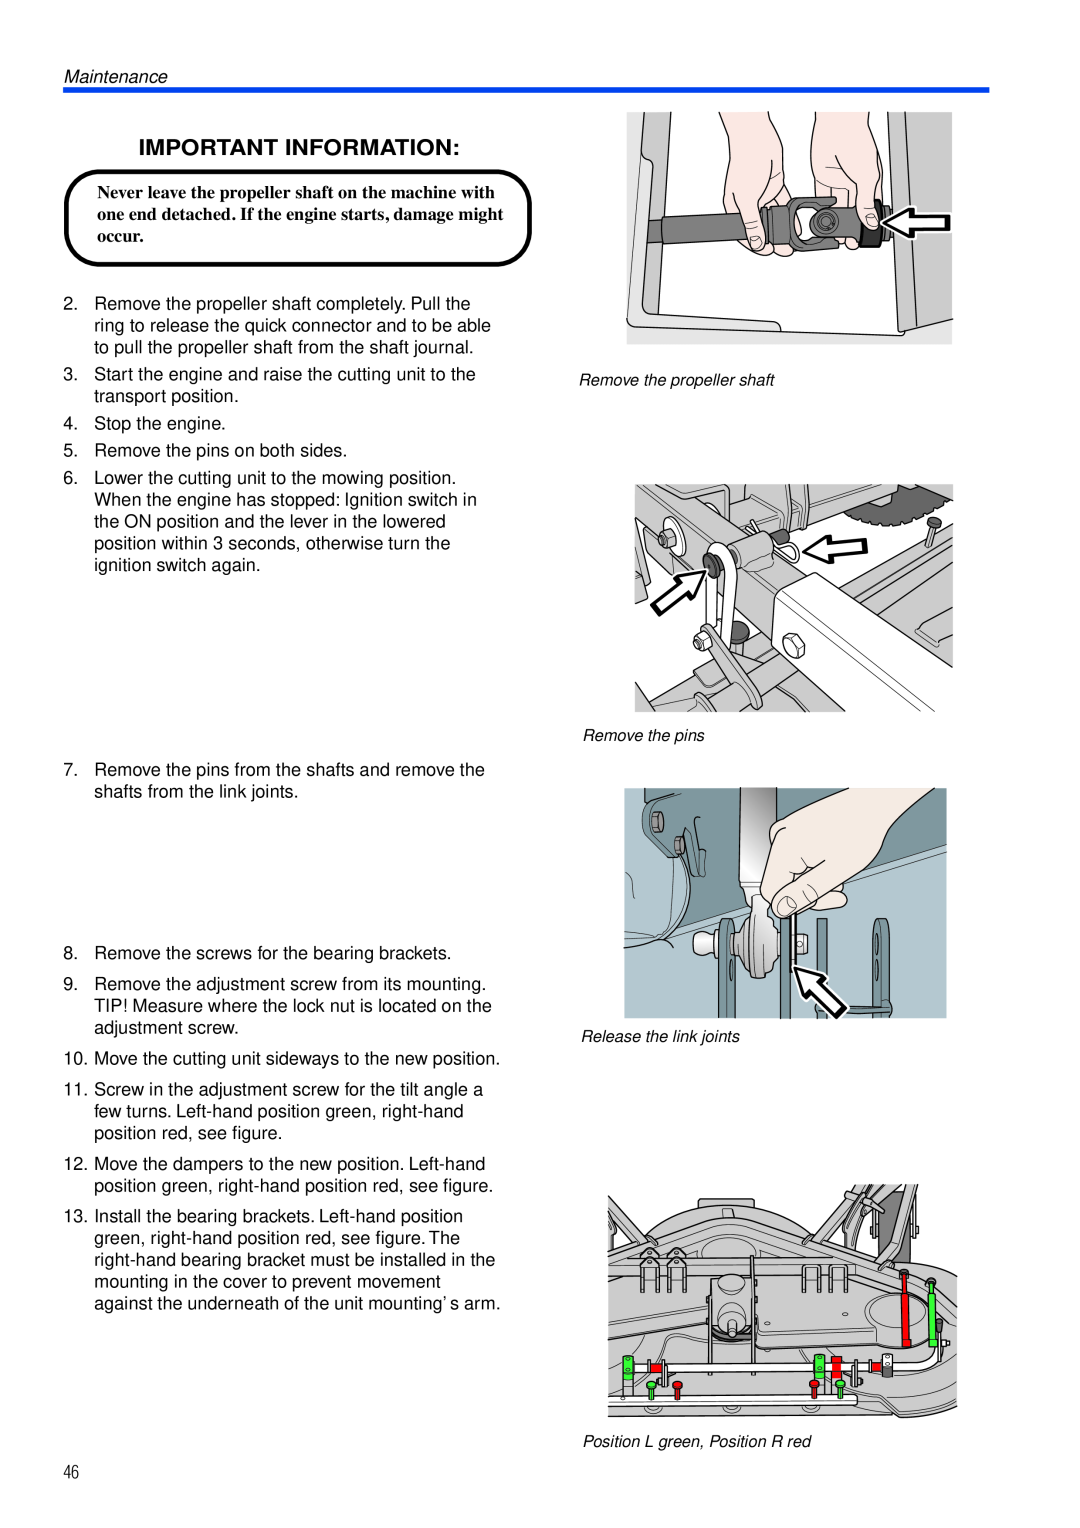 Husqvarna PT26 D manual Important Information, Maintenance, Stop the engine 5. Remove the pins on both sides 